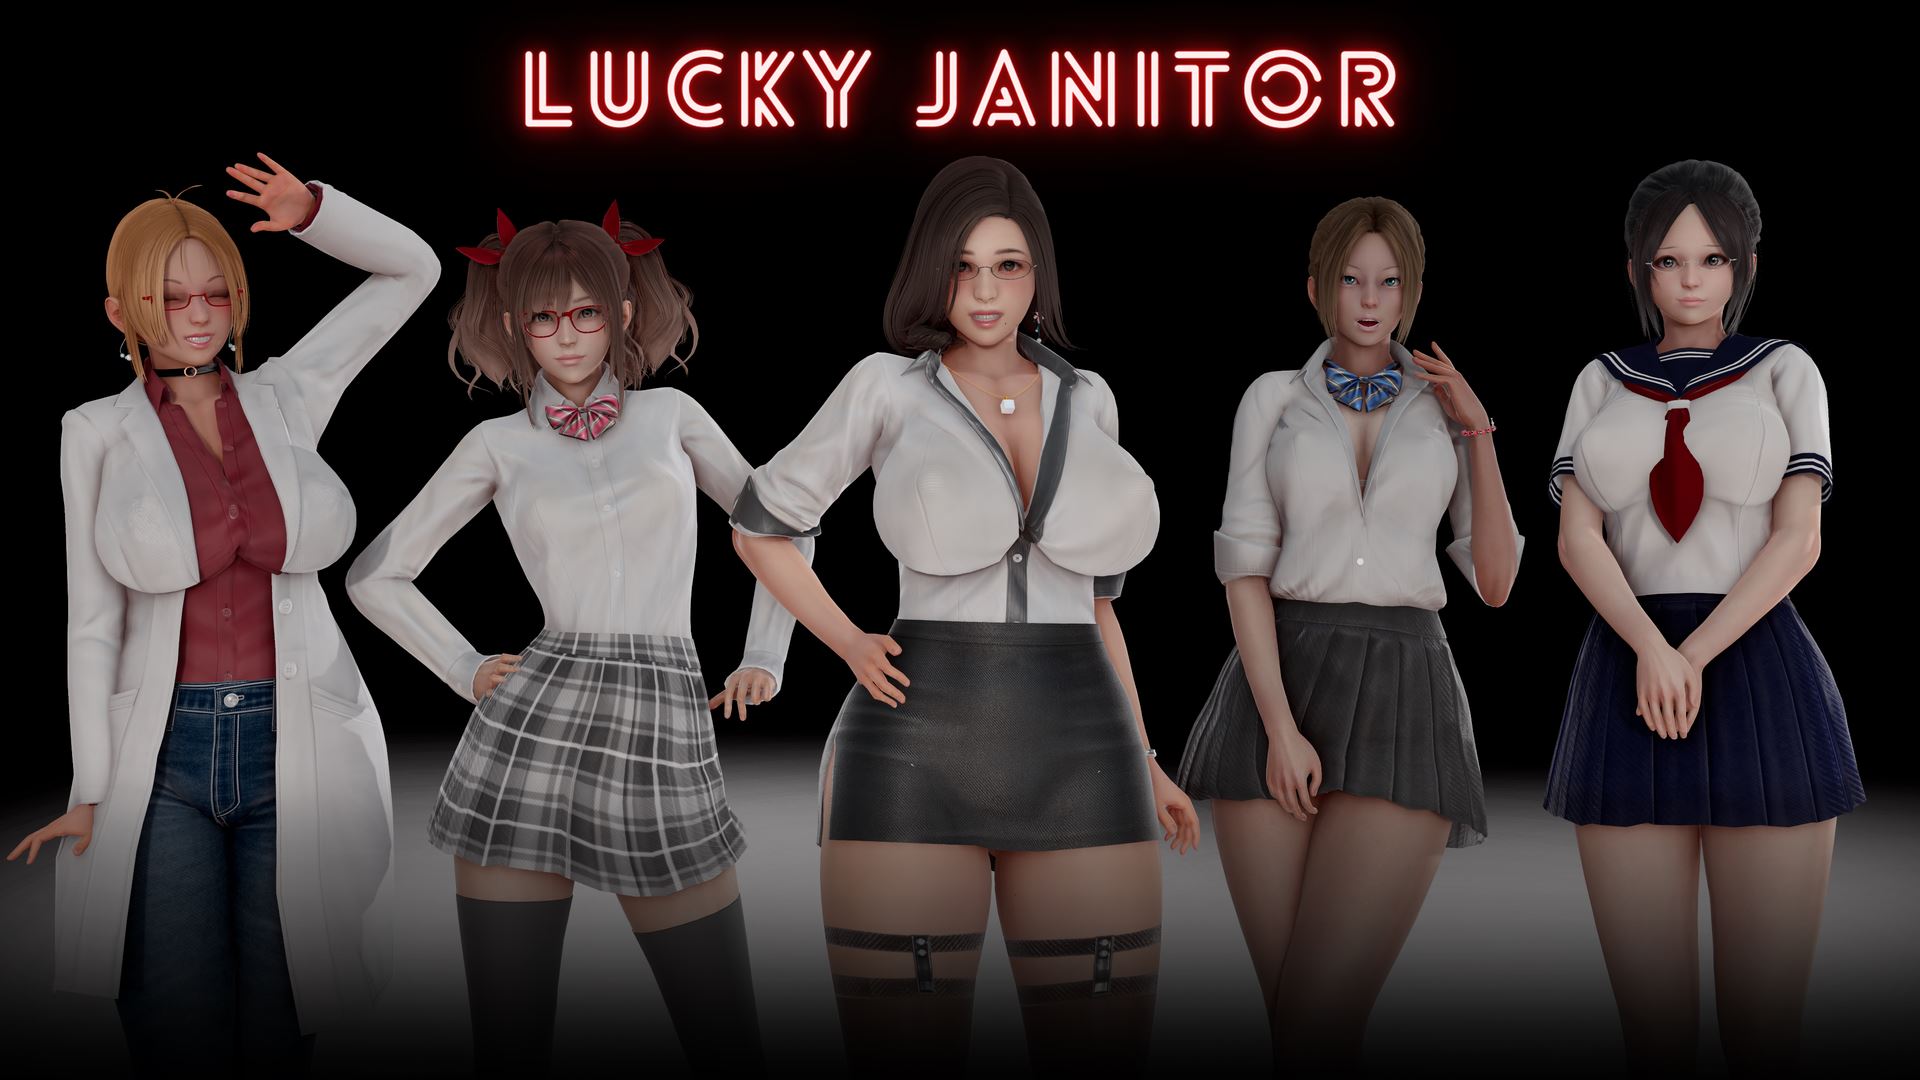 Lucky Janitor [Finished] - Version: Final